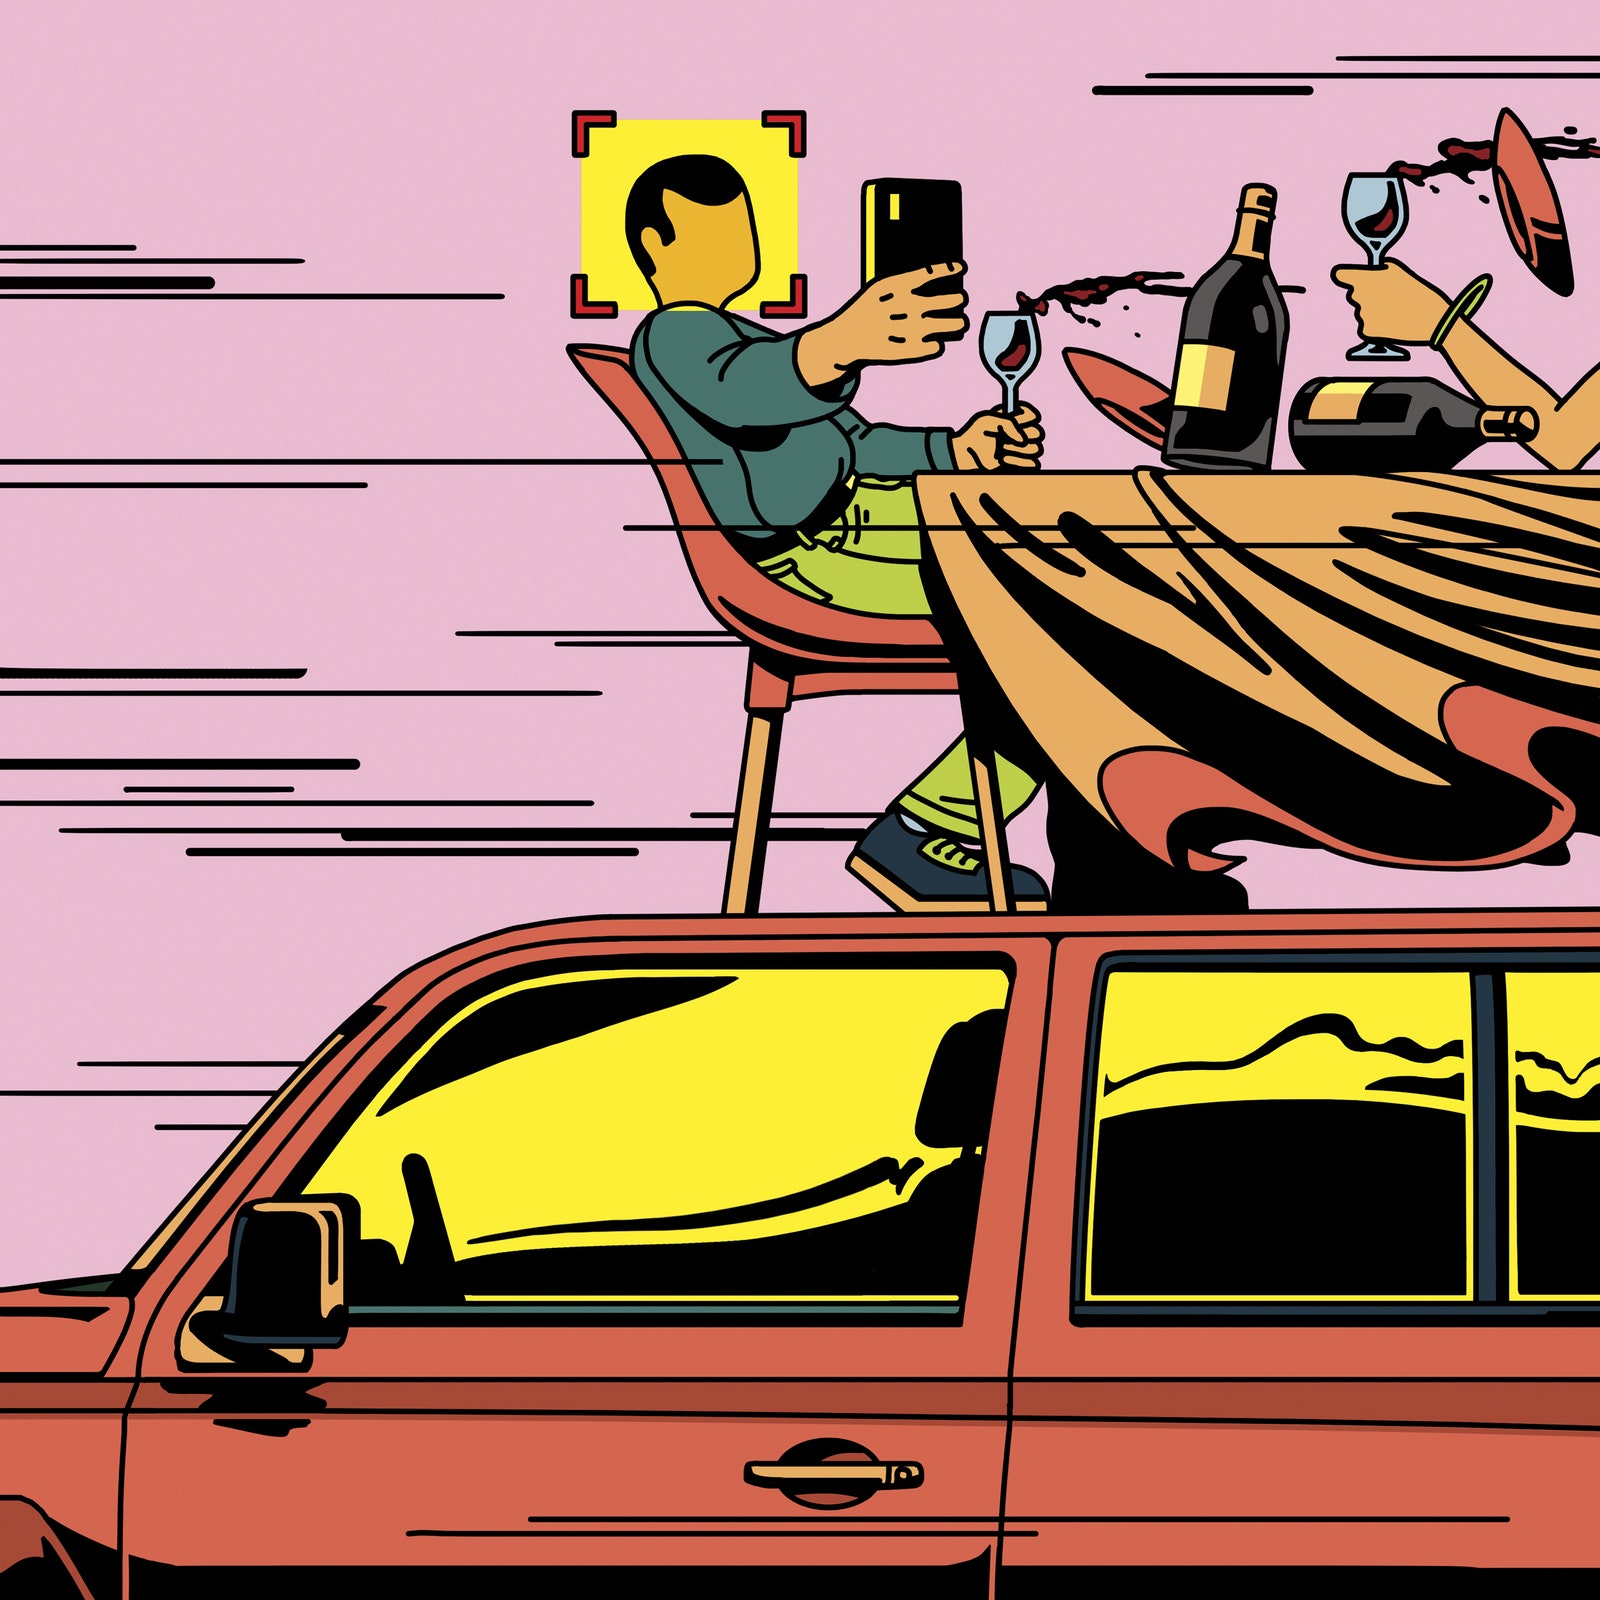 an illustration of a person sitting on top of a car dining at a table and taking a selfie at the same time.